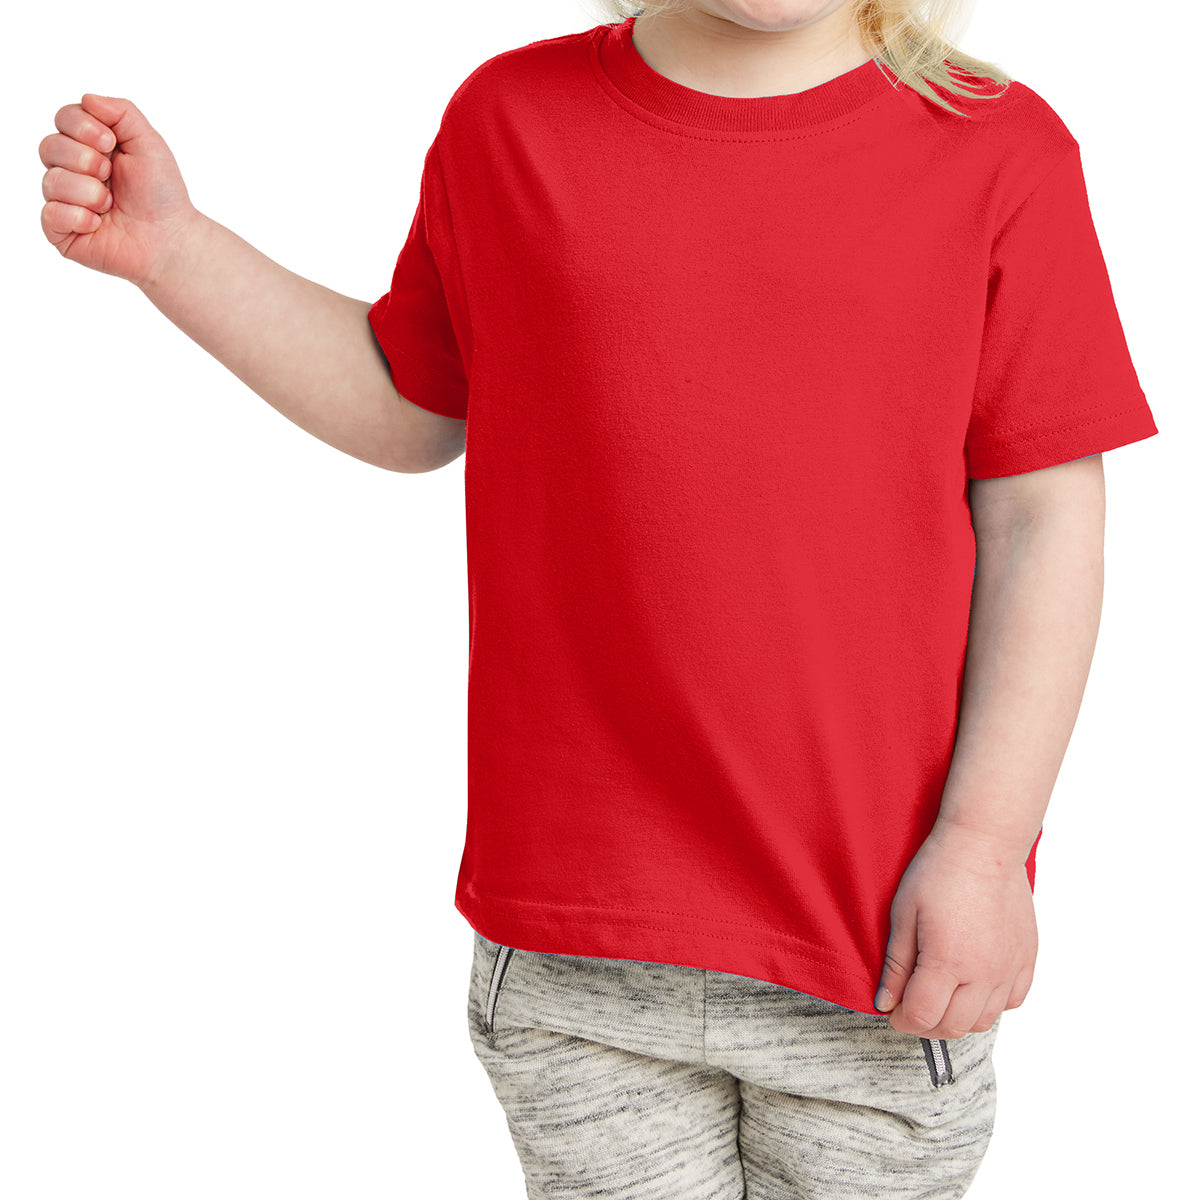 Toddler Fine Jersey Tee - Red